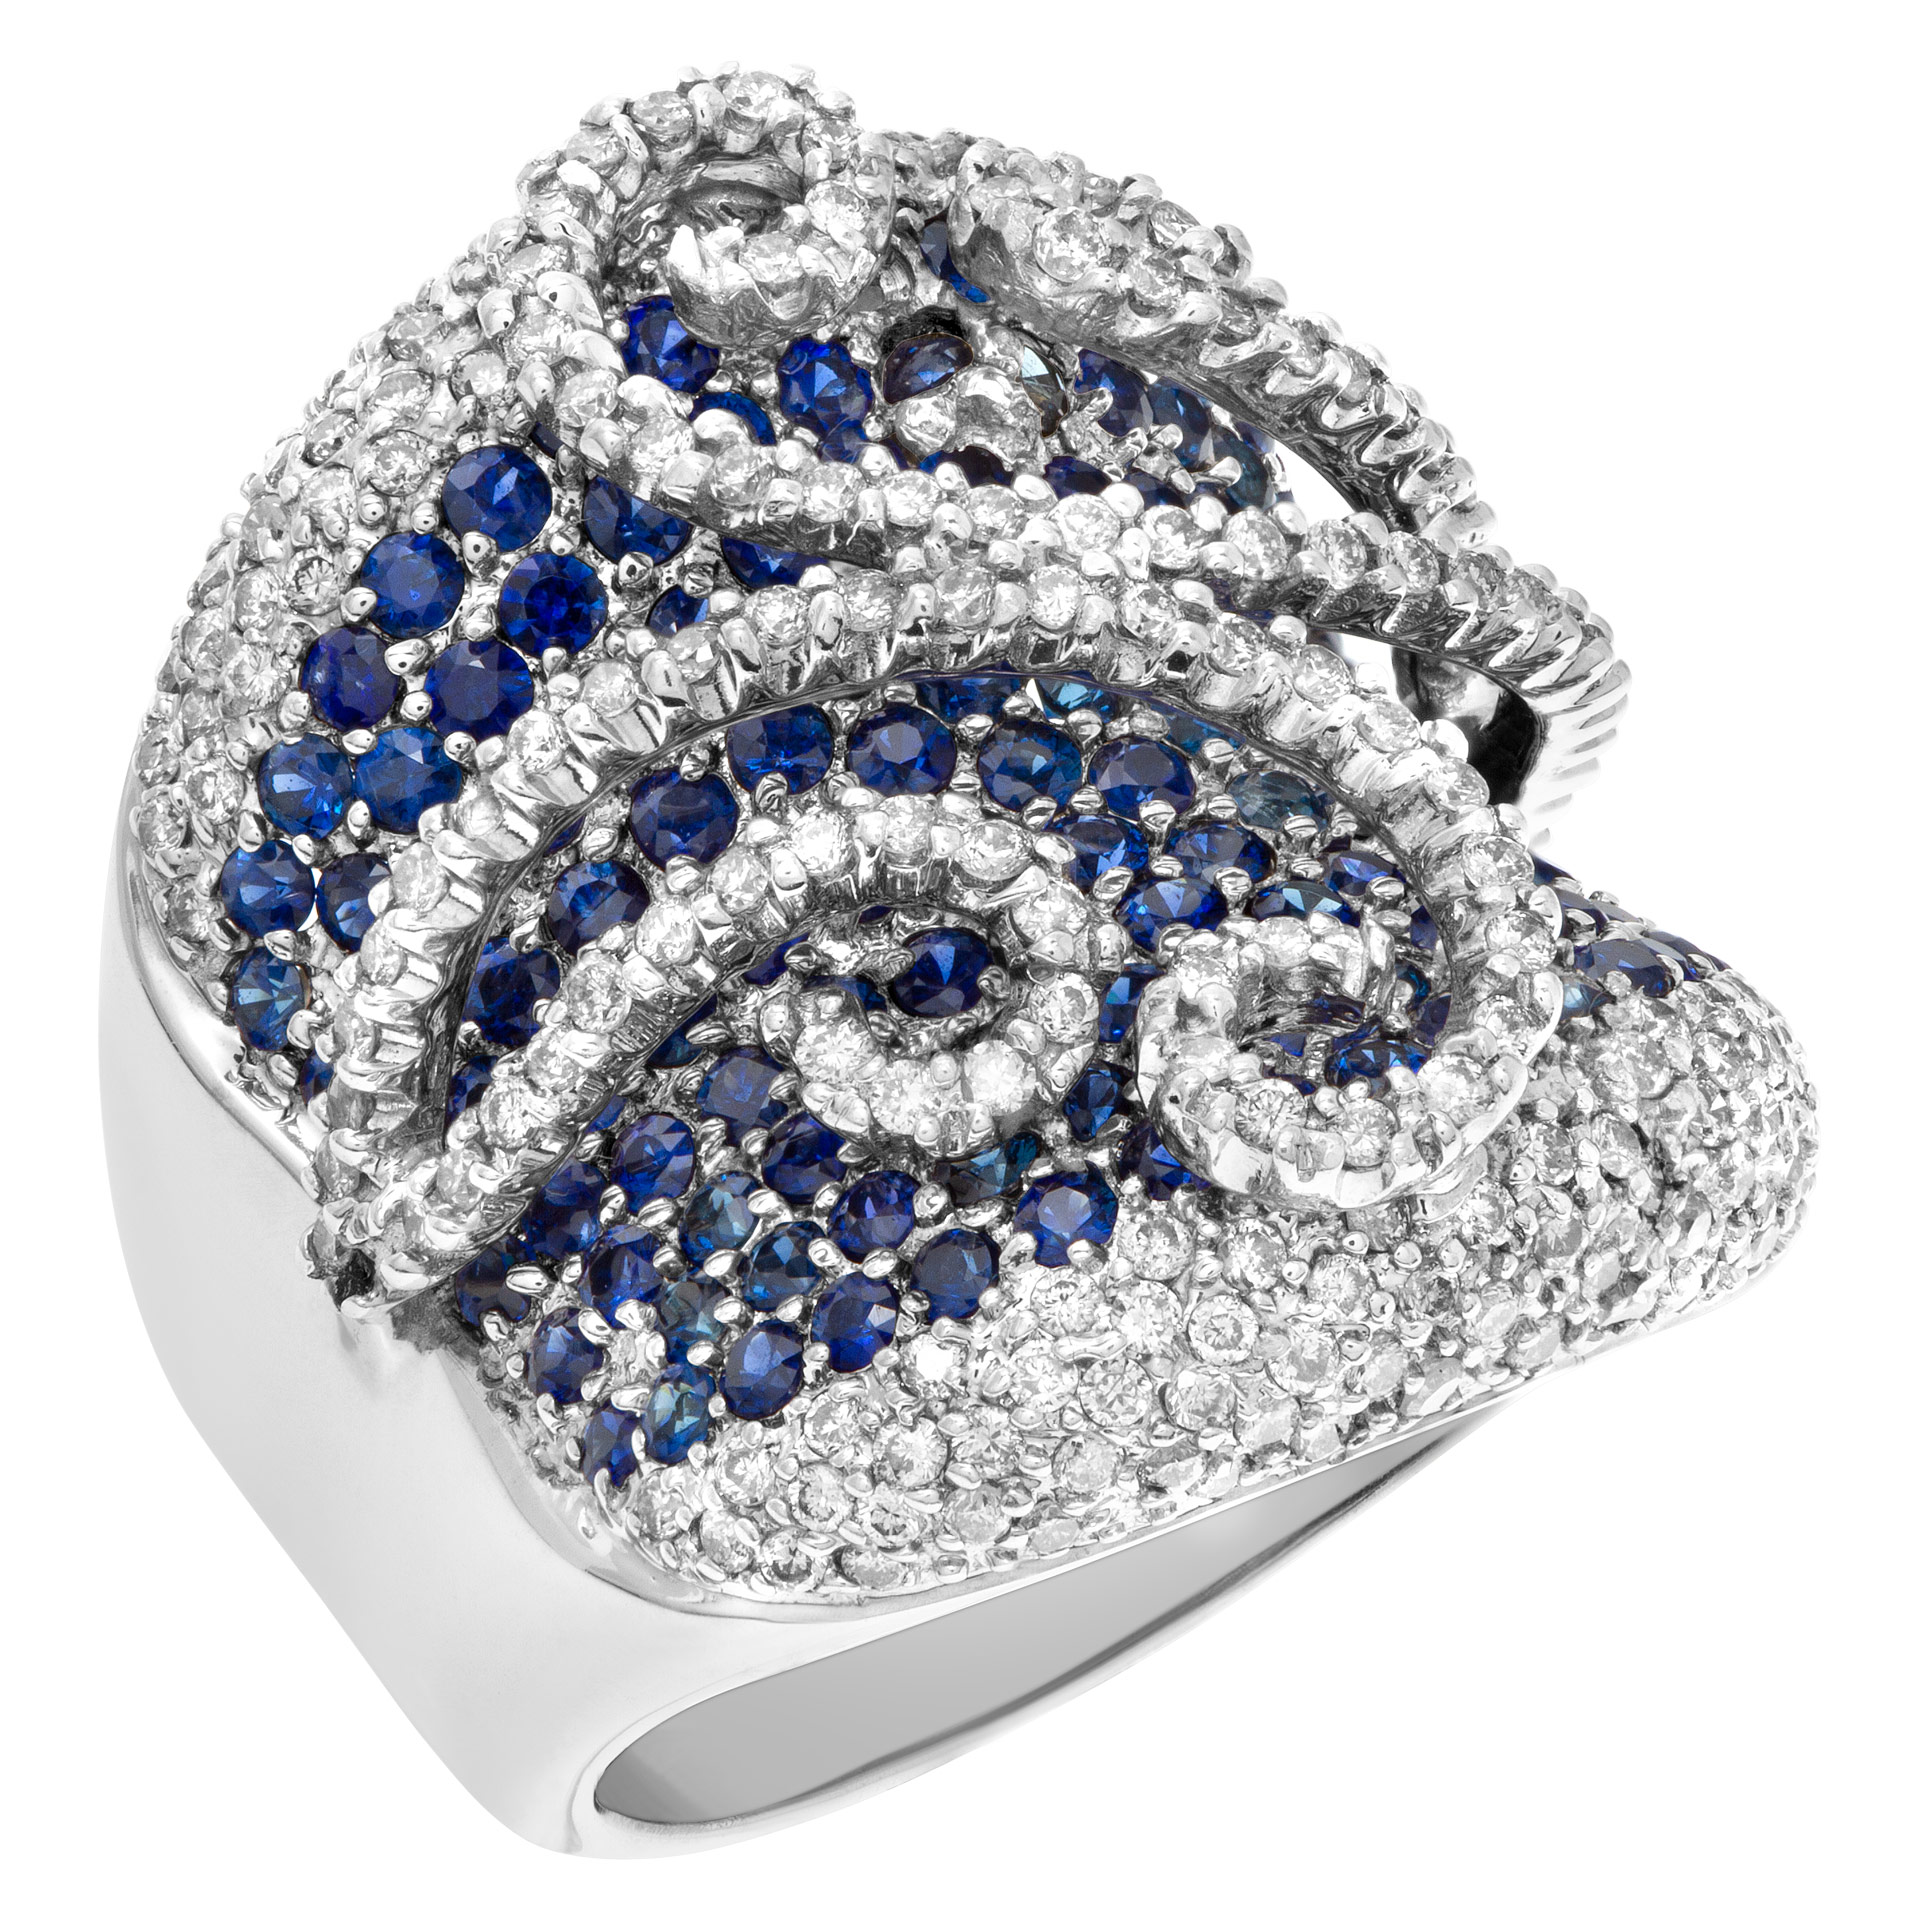 Wide pave diamonds & pave sapphire ring set in 18K white gold. image 2